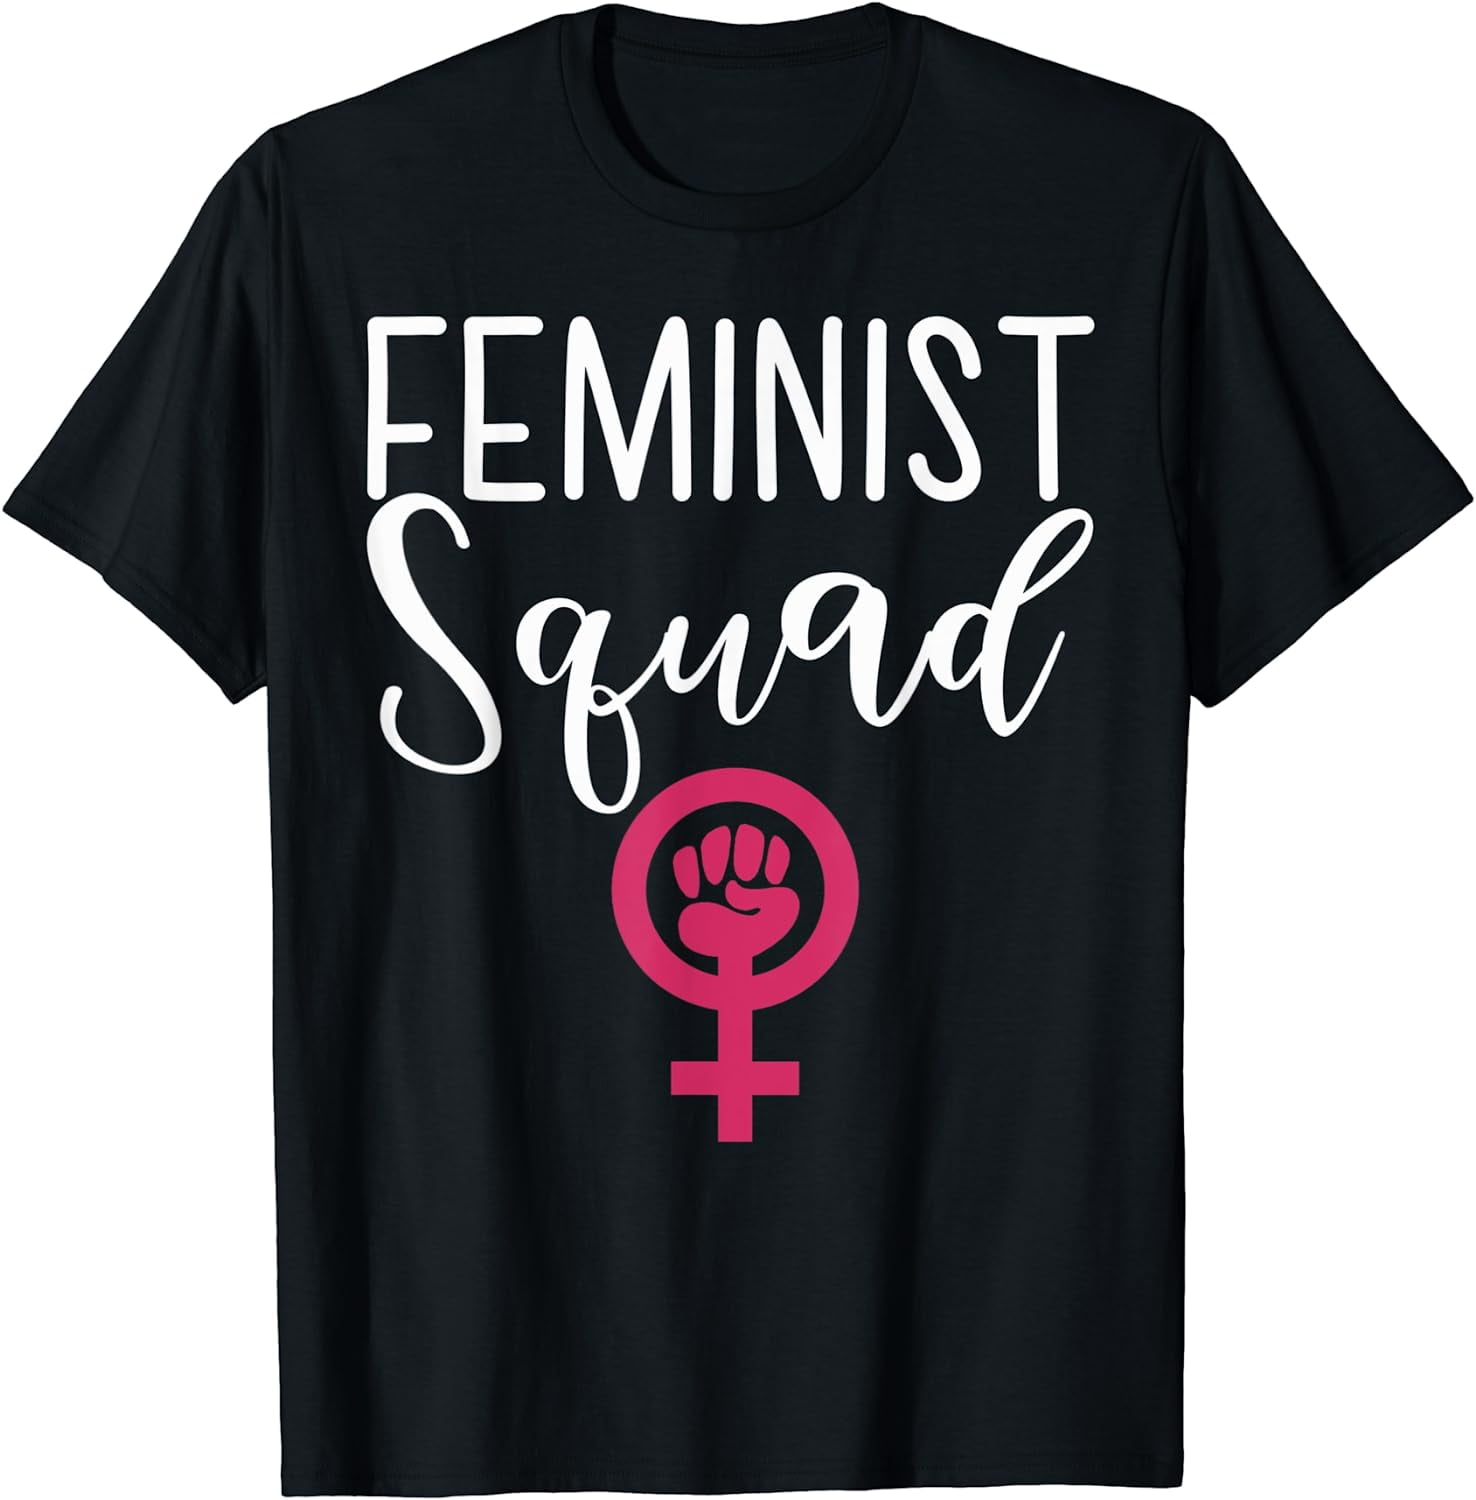 Feminist squad womens rights gender equality feminism tee T-Shirt ...